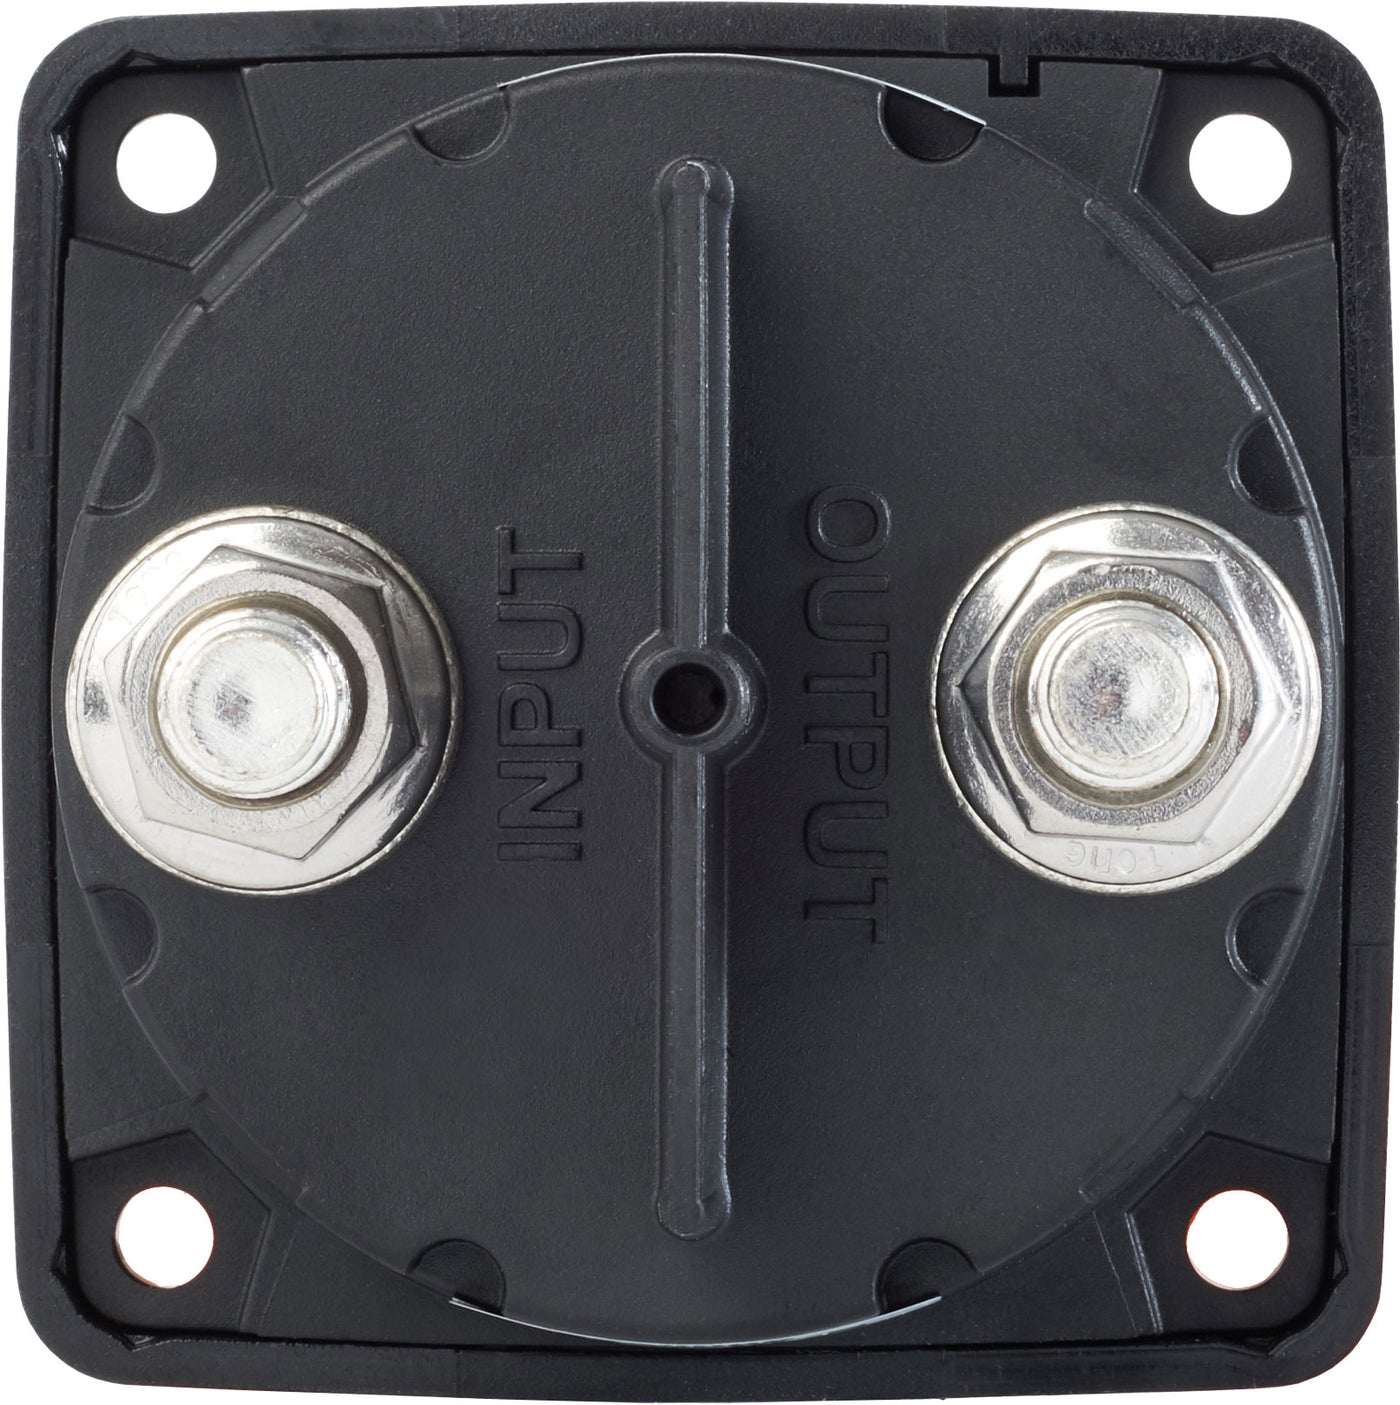 Blue Sea 6005200 m-Series Mini On-Off Battery Switch with Key - Black